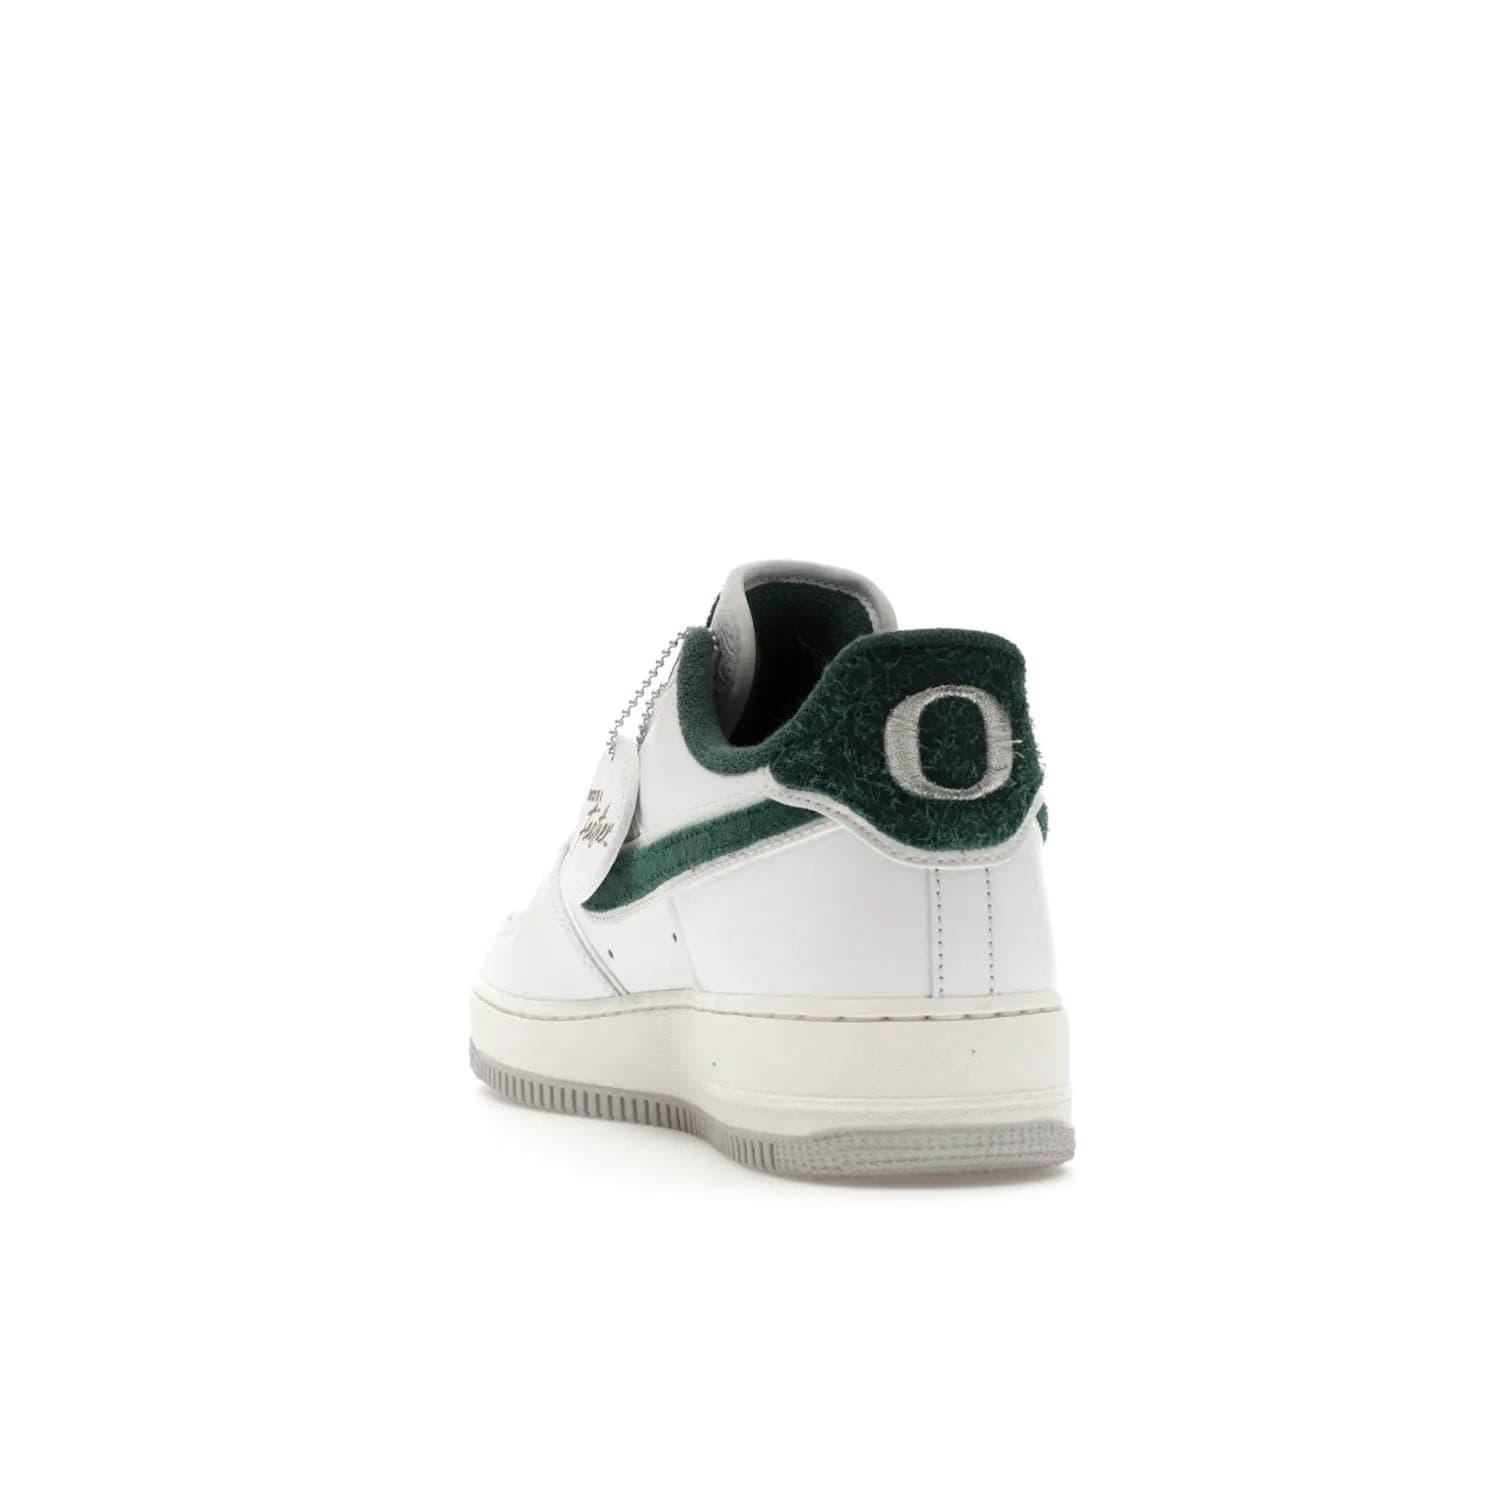 Nike Air Force 1 Low '07 Premium University of Oregon PE - Image 26 - Only at www.BallersClubKickz.com - The Nike Air Force 1 Low '07 Premium. Special Oregon University colorway. White base with green and sail accents. Cushioned rubber midsole. Comfort and style. Support your school!